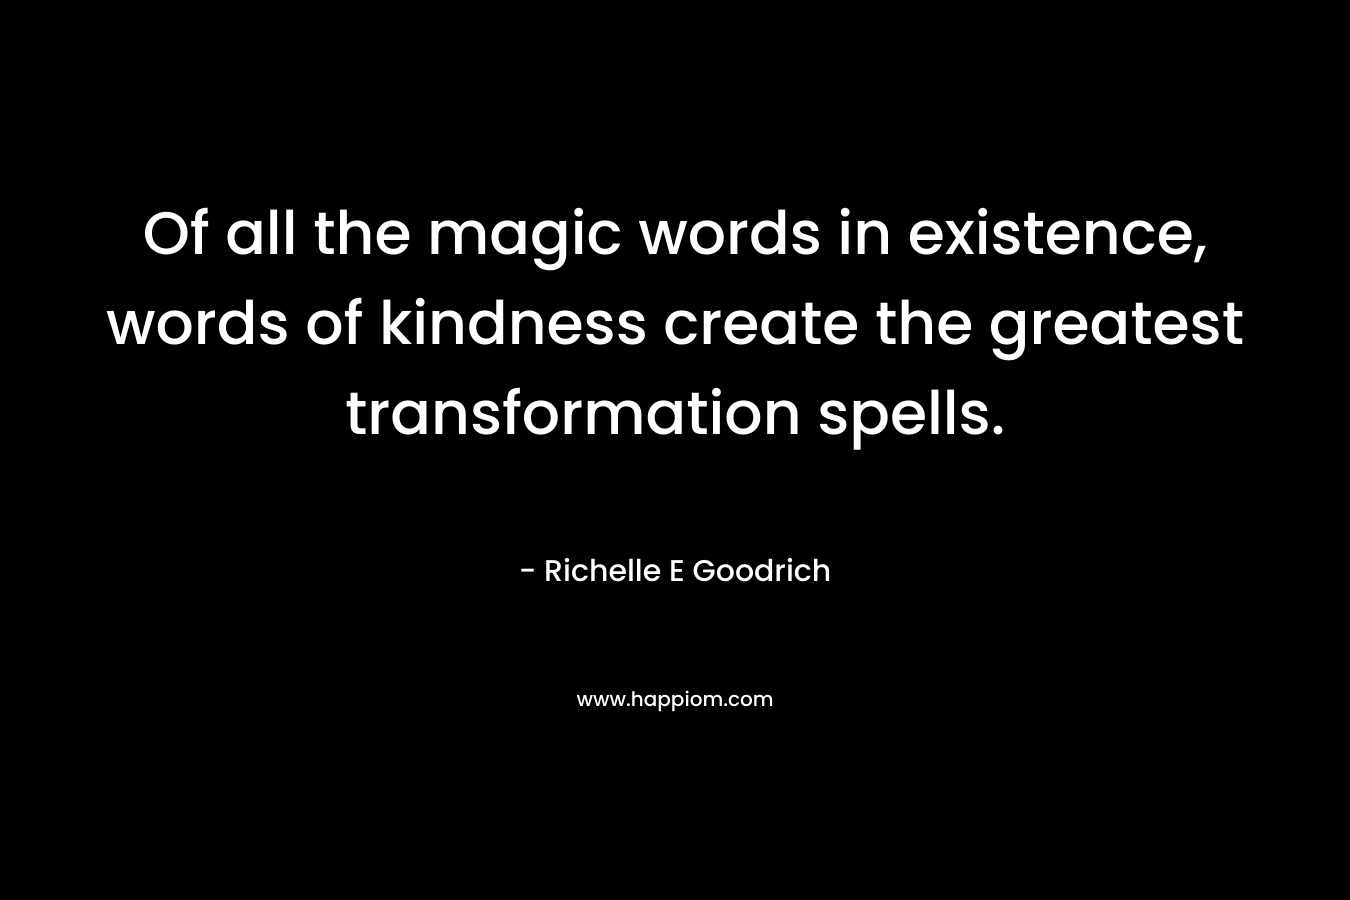 Of all the magic words in existence, words of kindness create the greatest transformation spells.